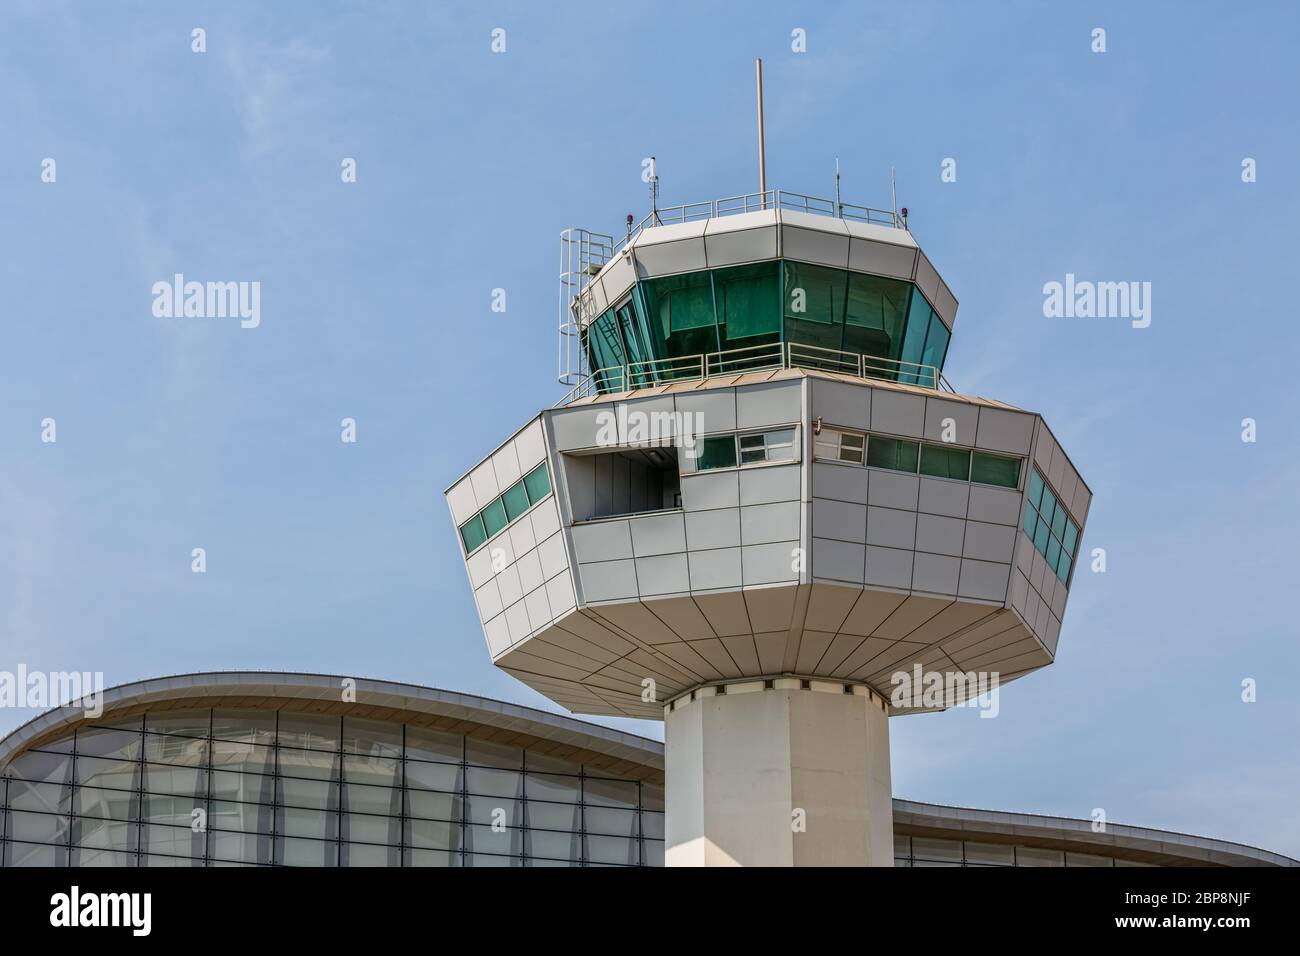 Control tower of the new airport building in Dubrovnik Croatia Stock Photo